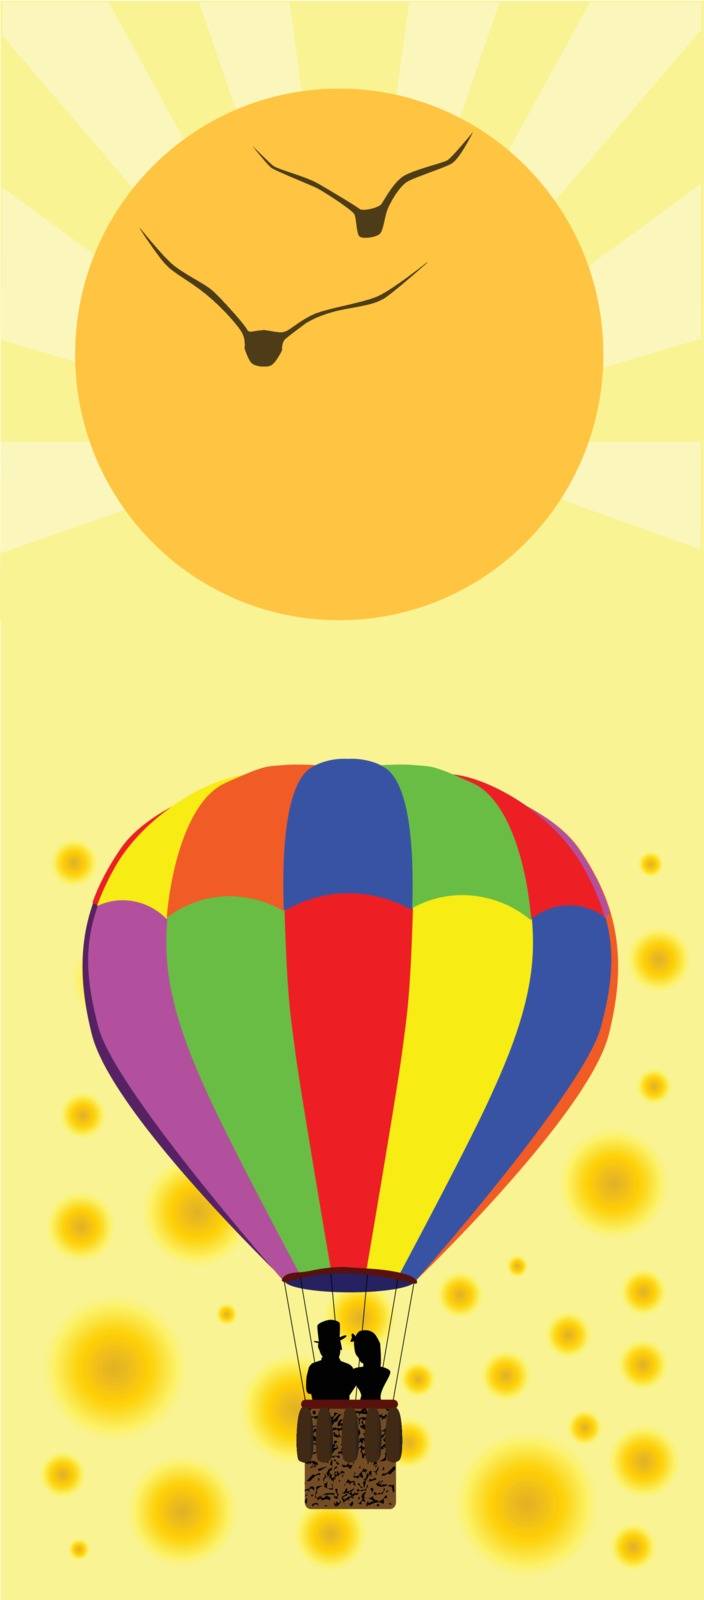 A typical multi coloured hot air balloon floating away with a couple in silhouette in the basket, all over a aummer style background.